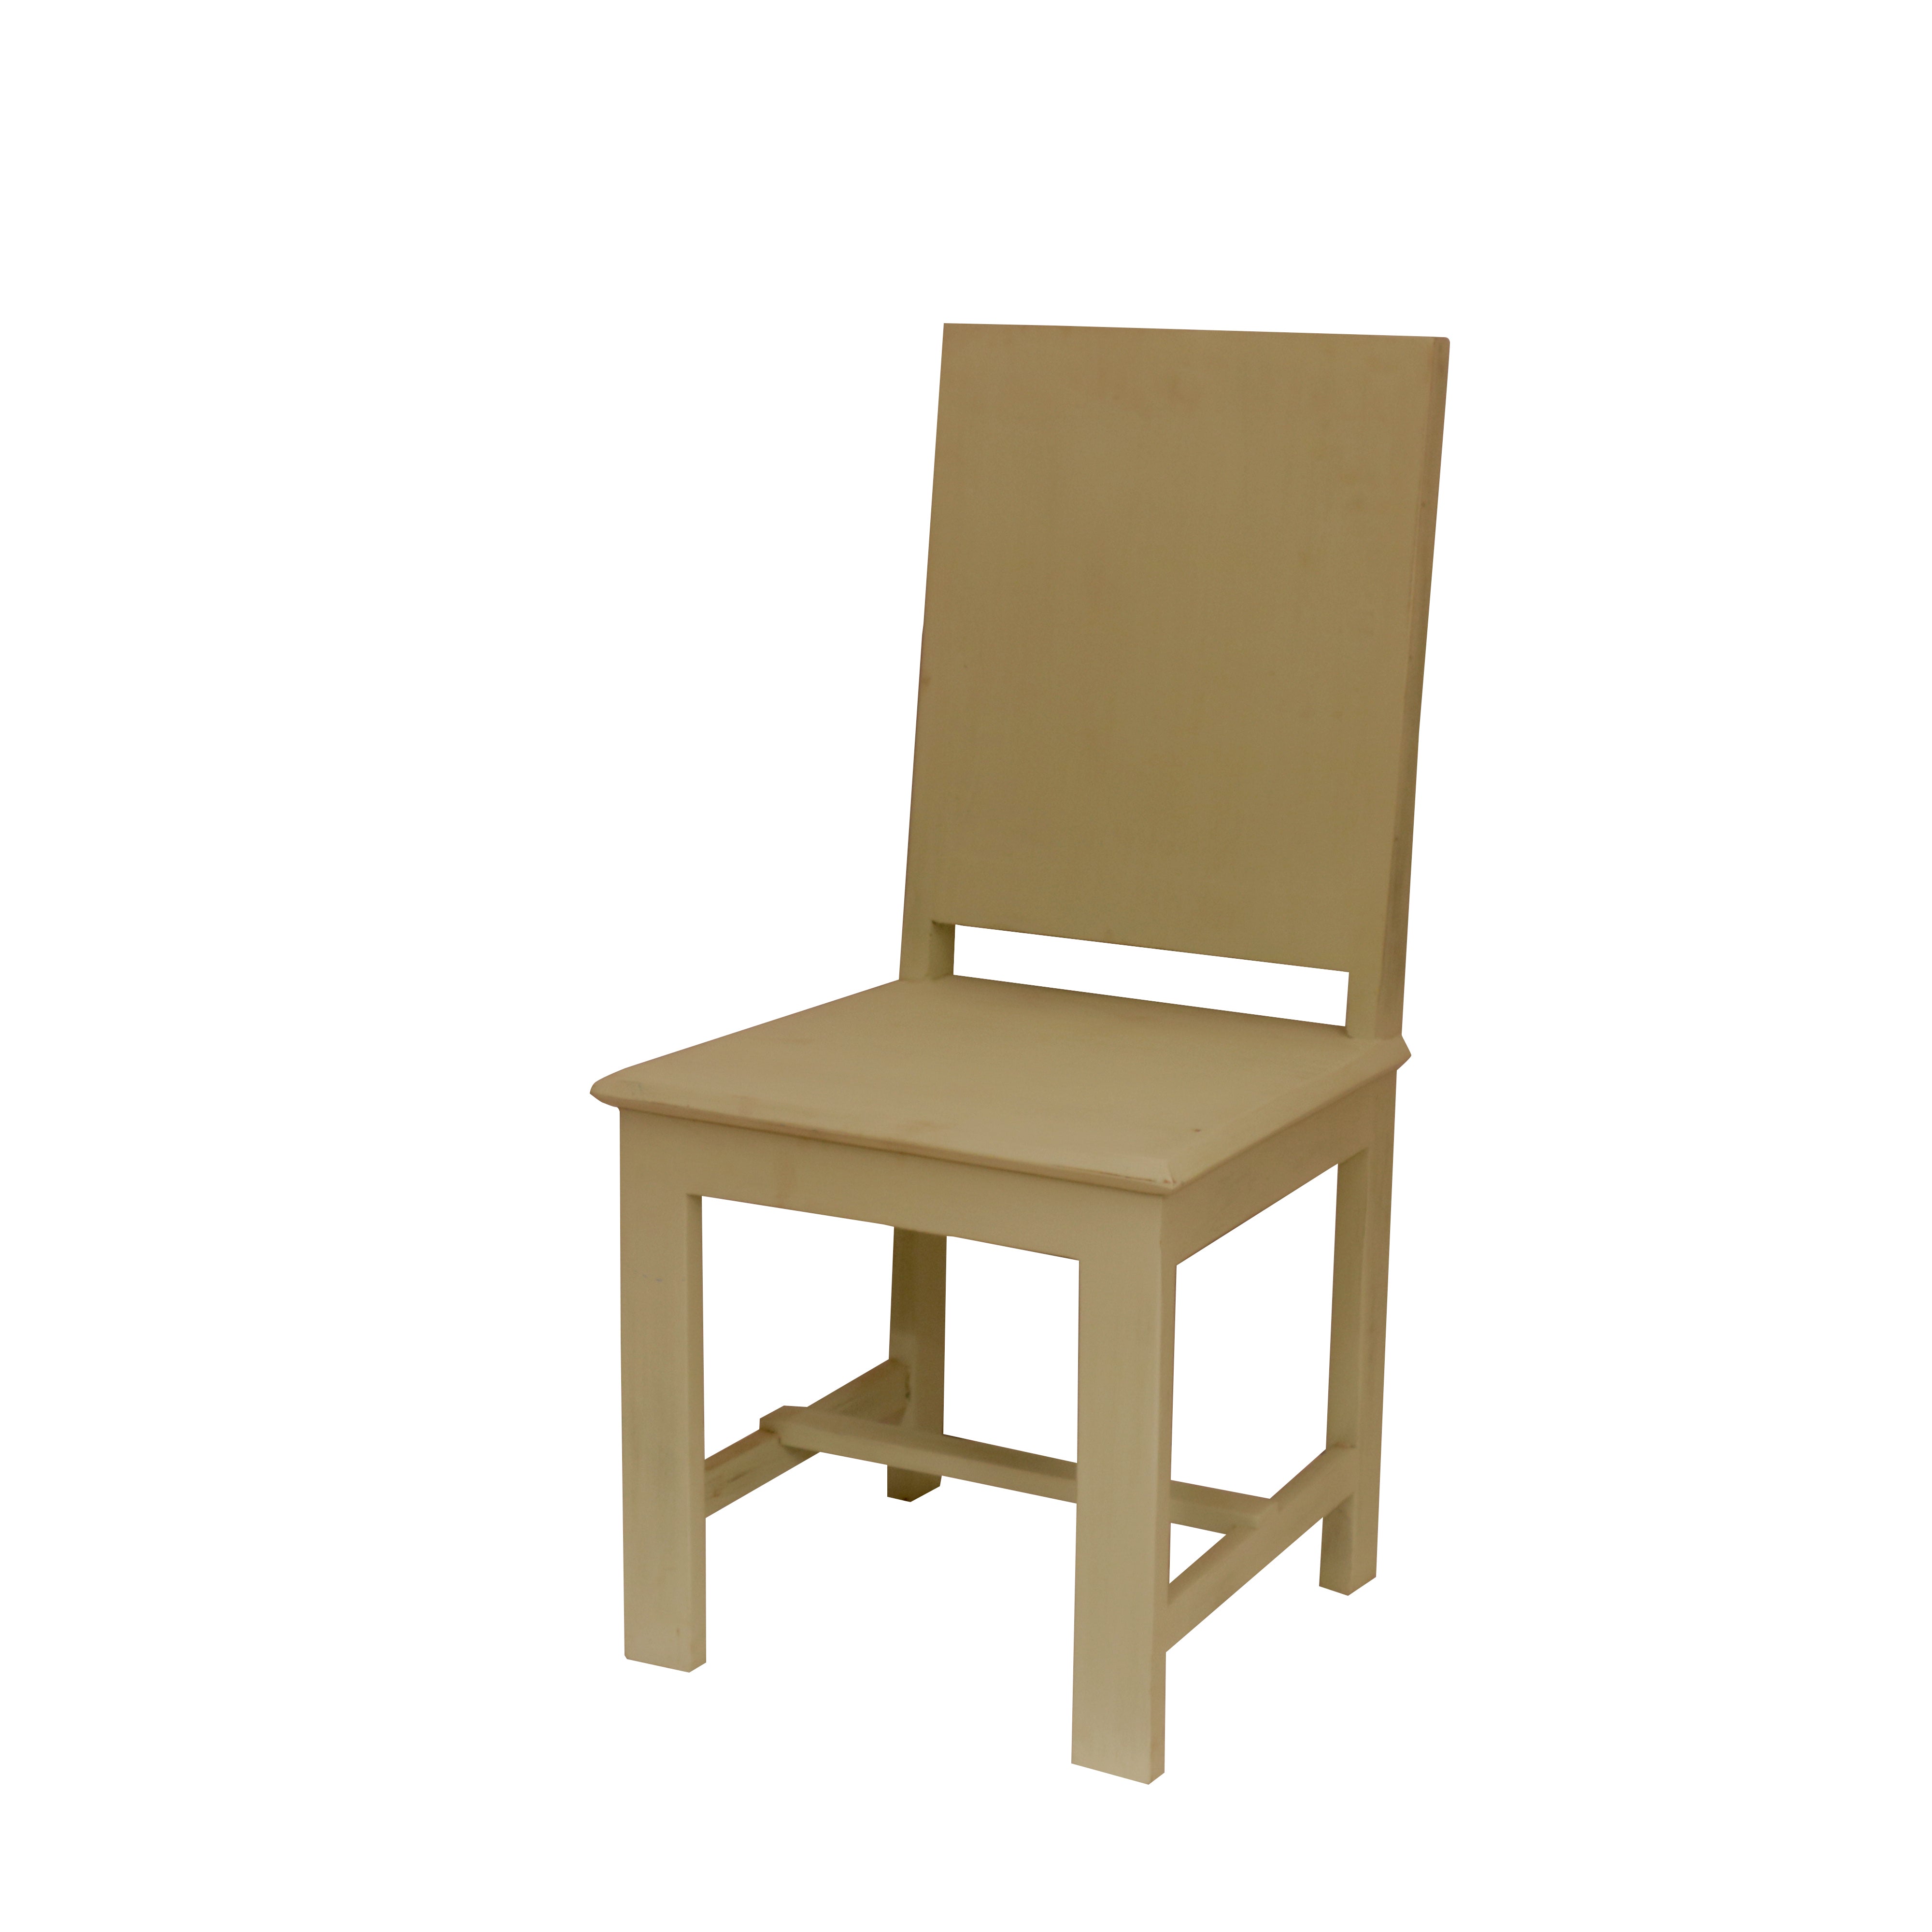 (Set of 2) Simple Cream Hued Chair Dining Chair